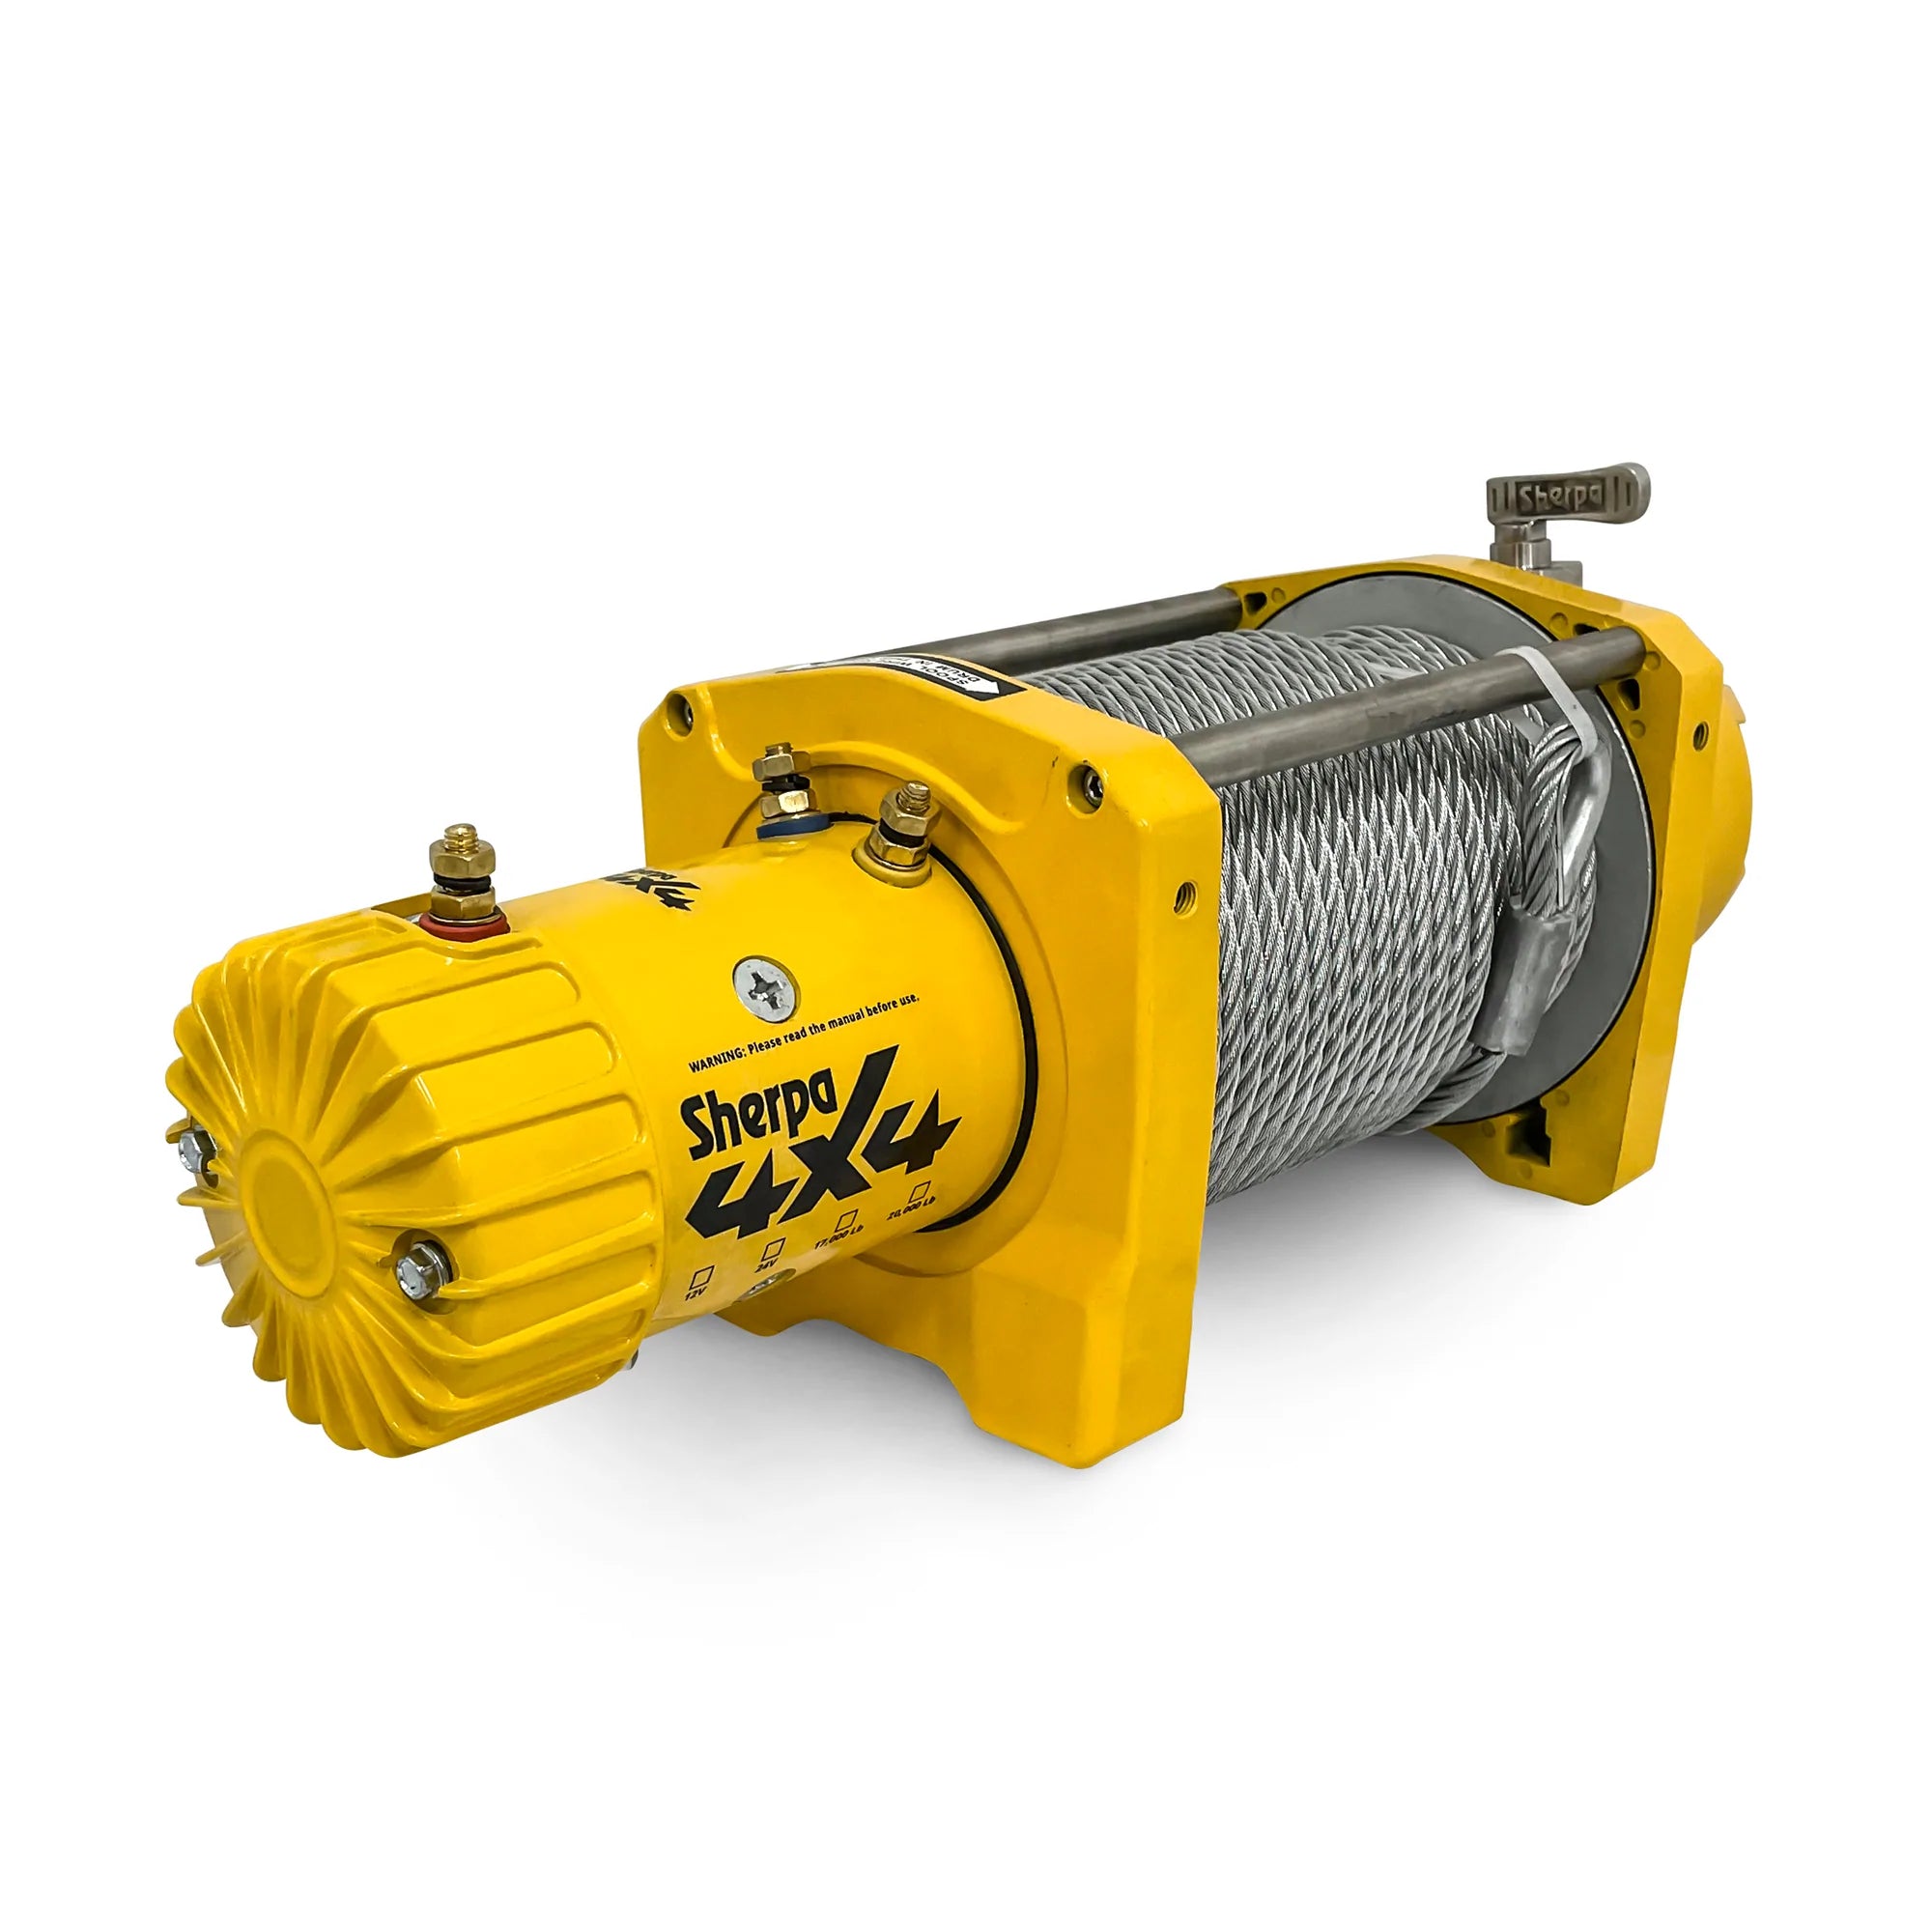 Tow Truck Winch - 20,000 LB